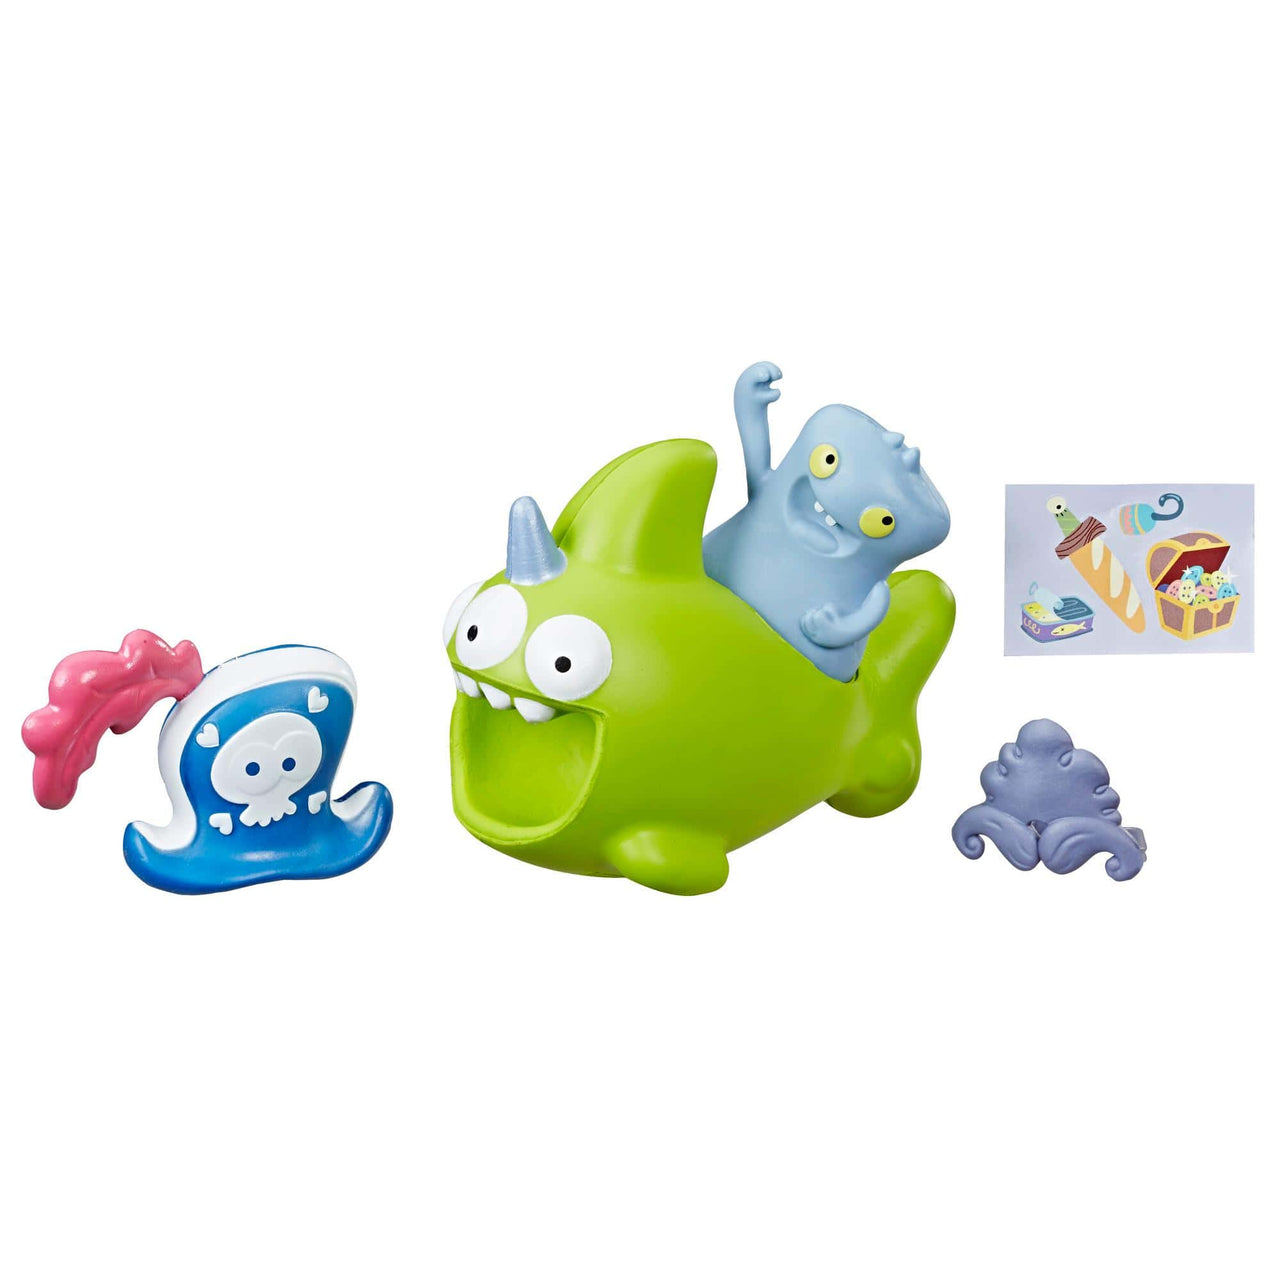 Ugly Dolls Babo and Squish-and-Go Sharwhal